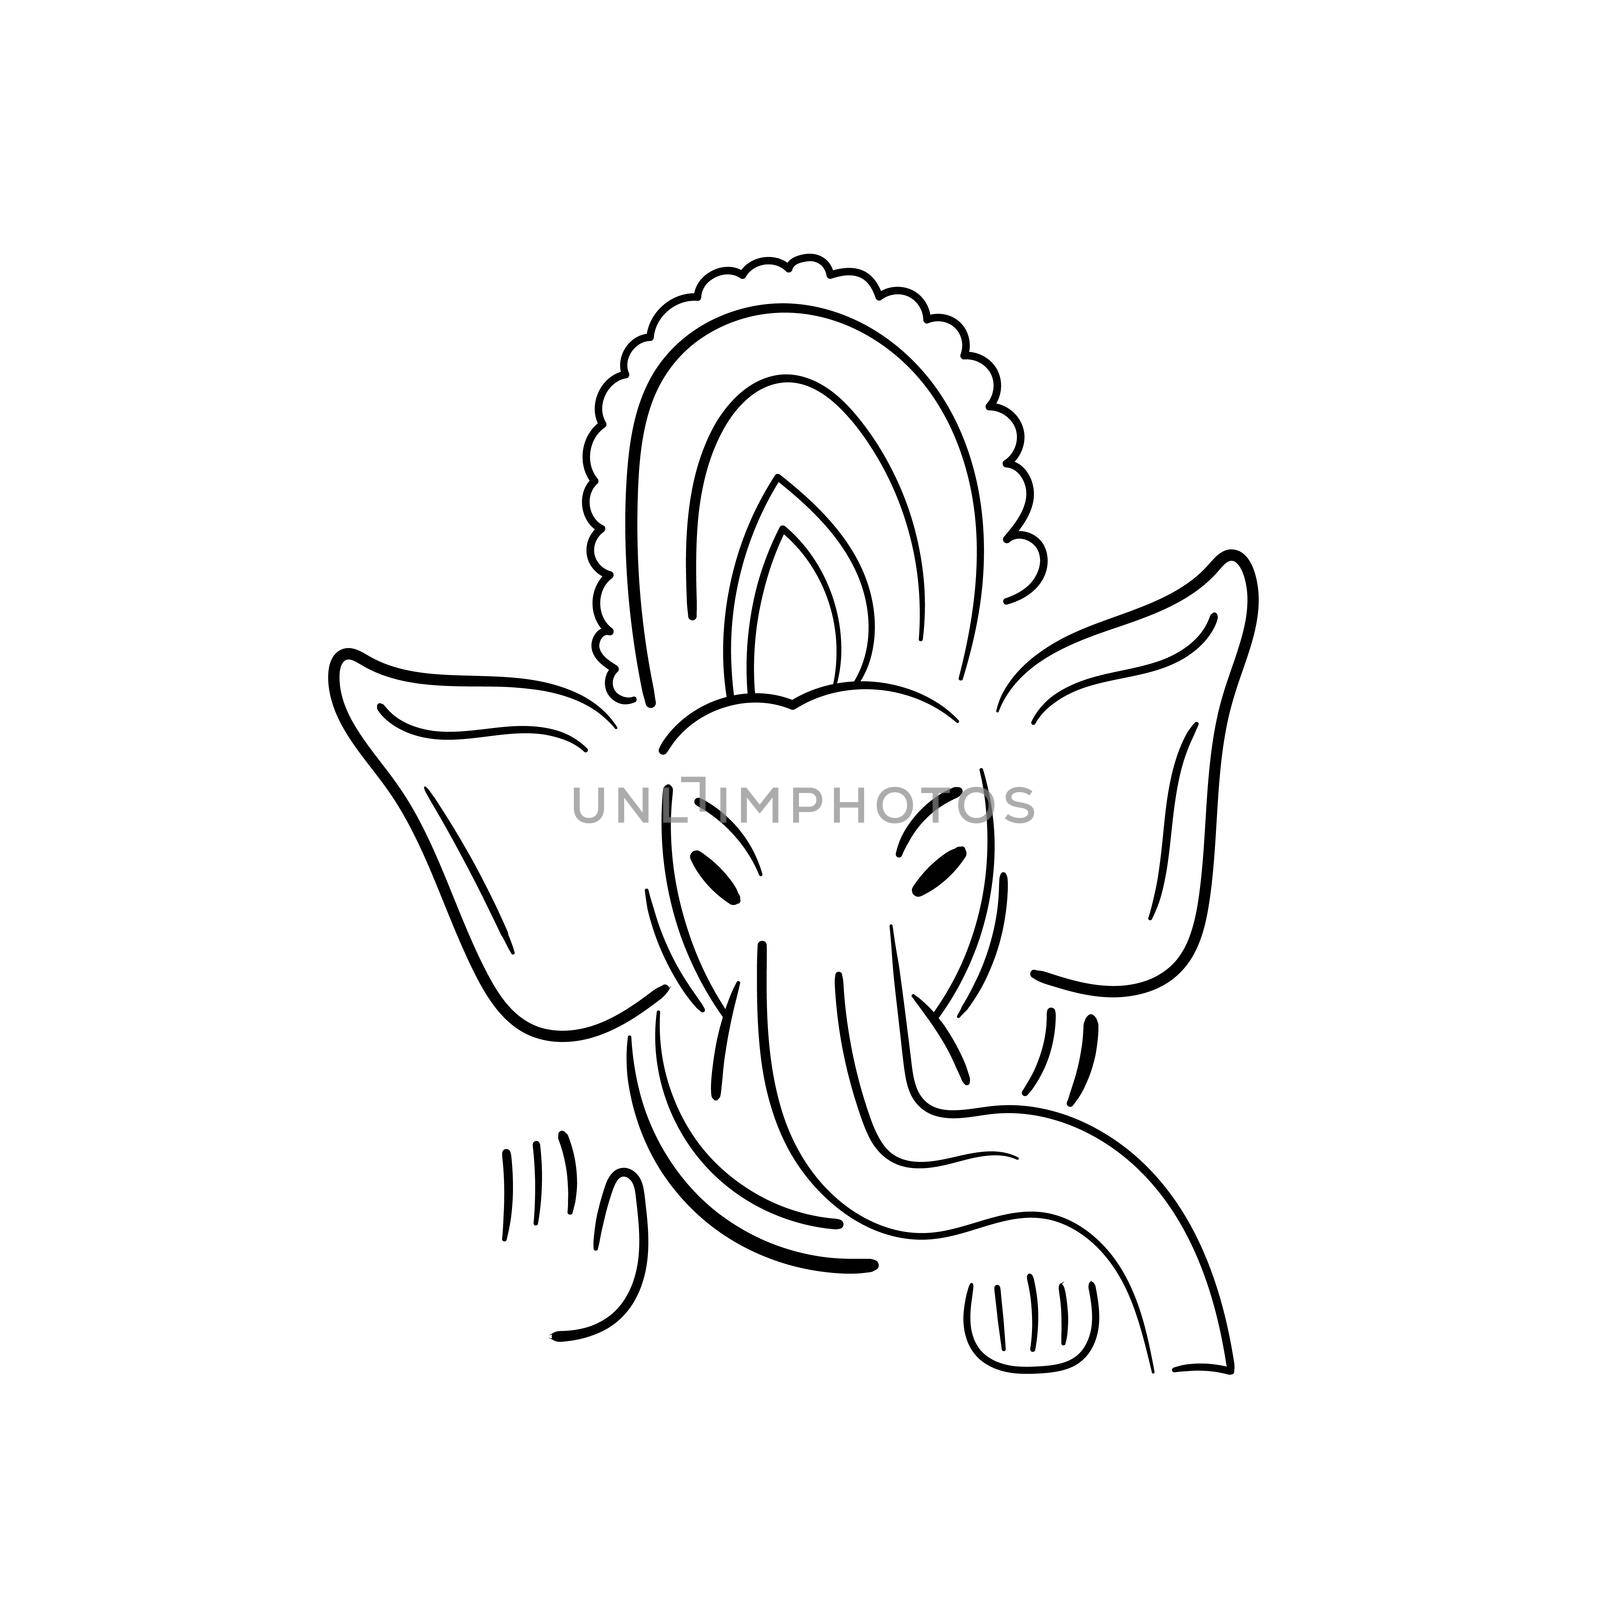 Happy Ganesh Chaturthi Festival Becground Template with Lord Ganesha Head. Simple card